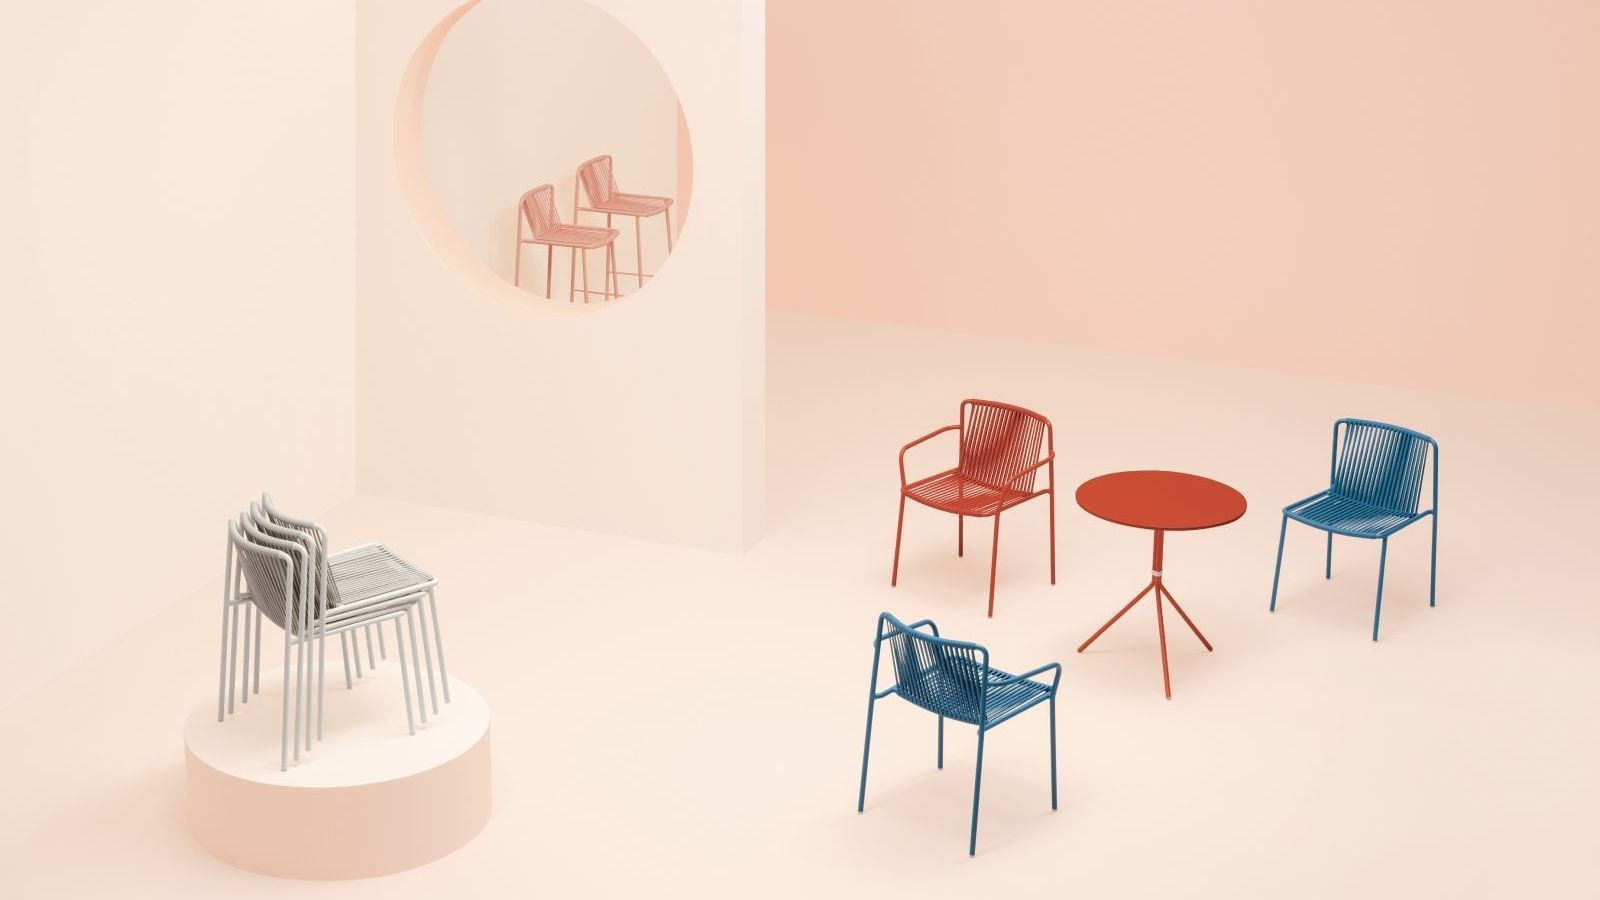 Pedrali furniture dotted around a large spacious room in a modern layout. The chairs are red, peach and blue. A stack of grey Tribeca 3660 chairs are on top of a pedestal. 